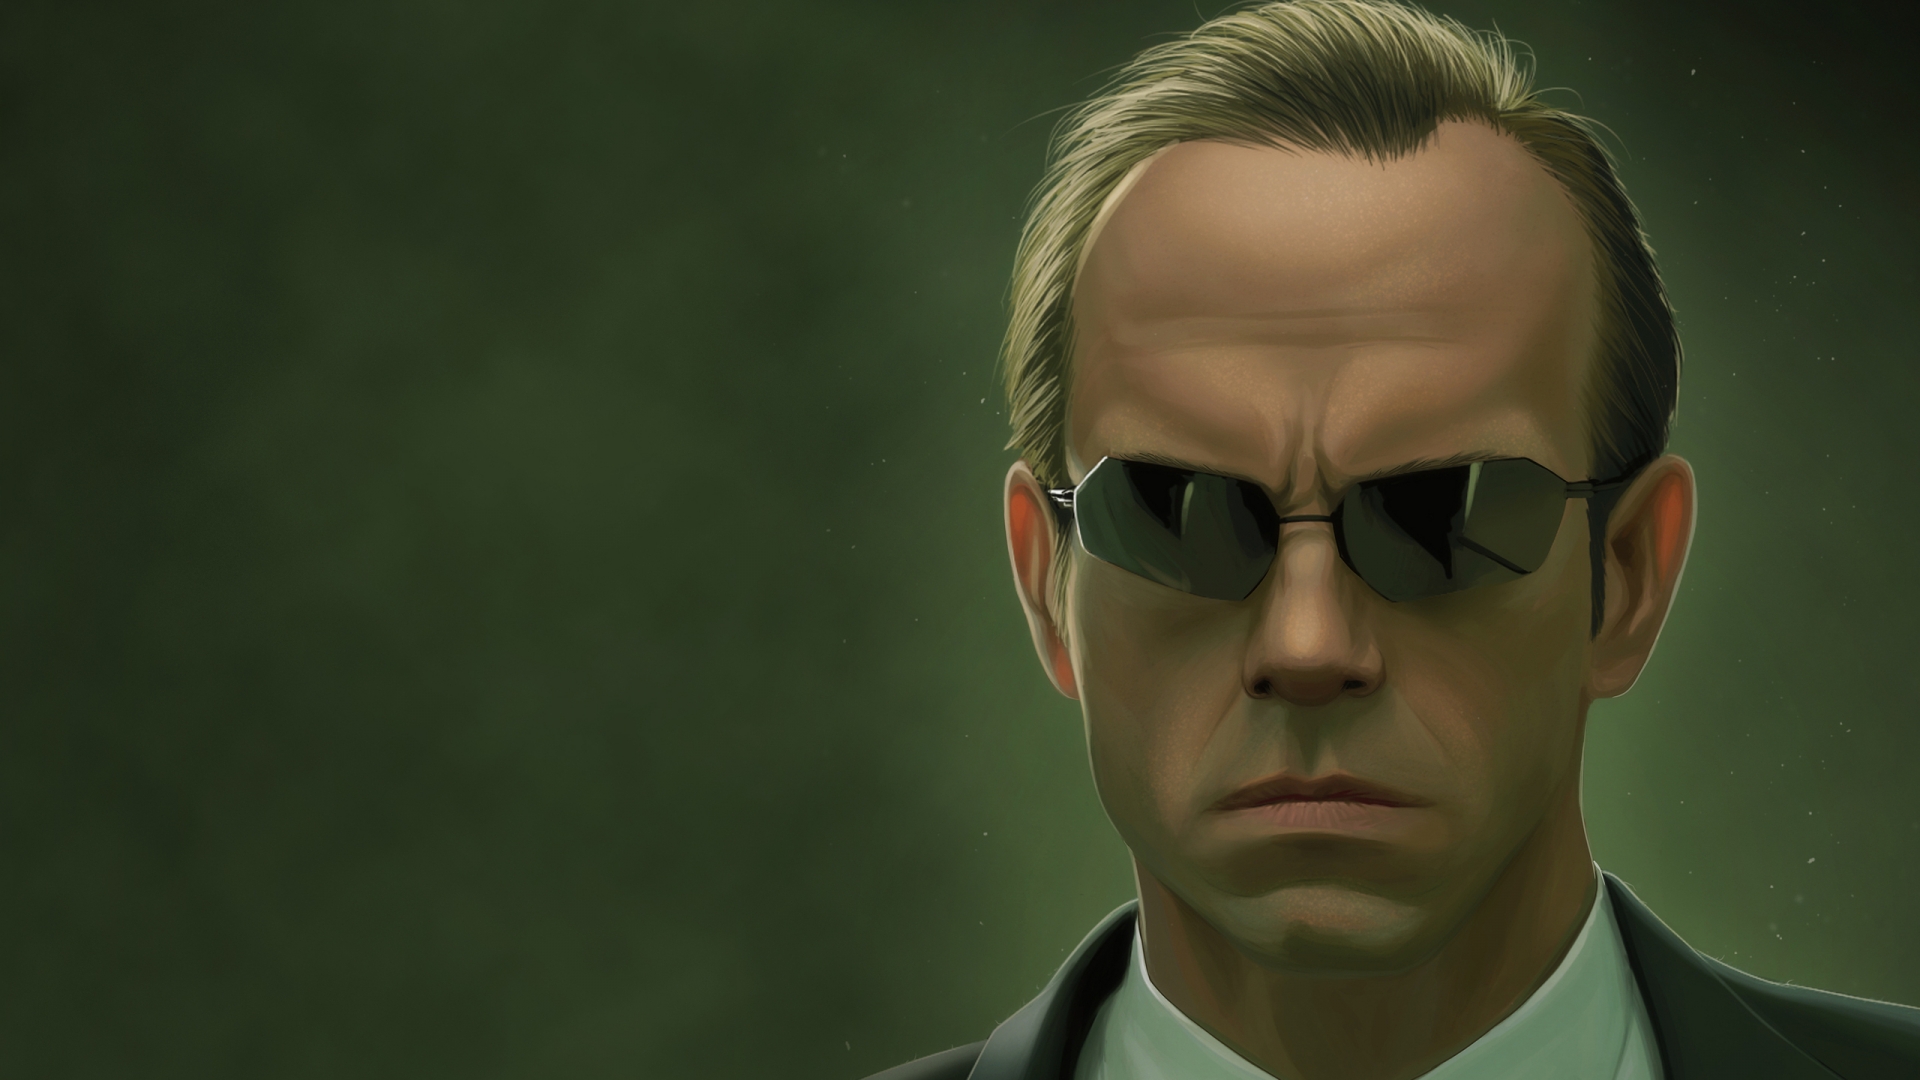 The Matrix Agent Smith for 1920 x 1080 HDTV 1080p resolution